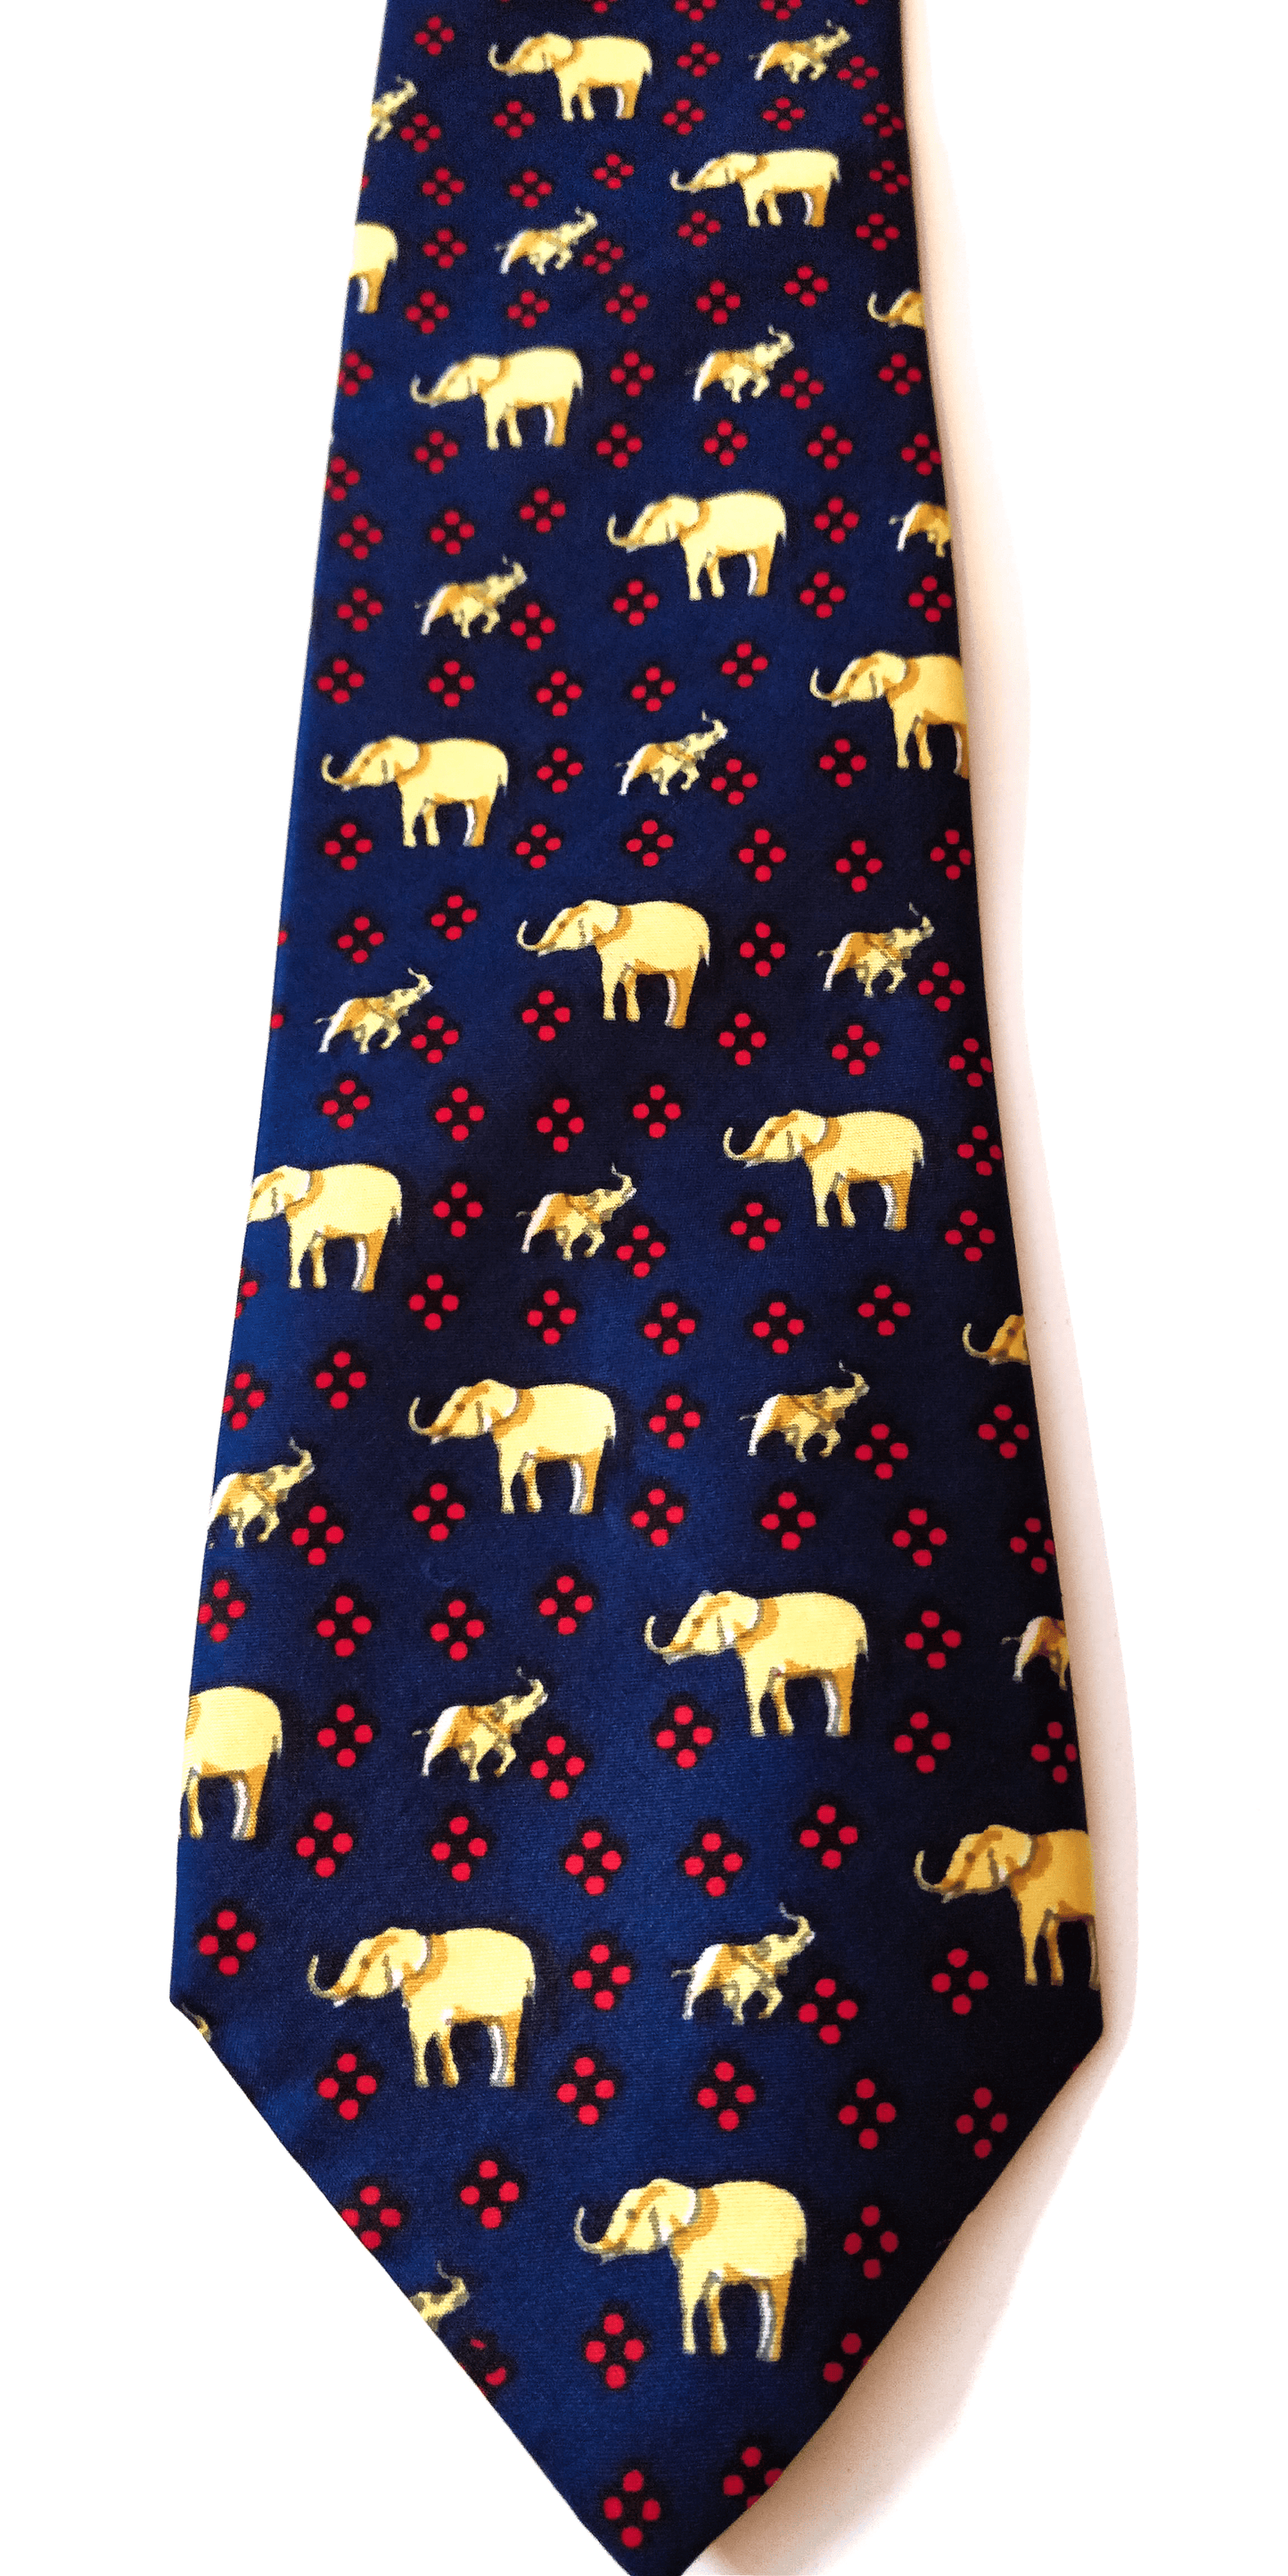 Mughal Elephant Series Blue Red Dotted Silk Tie